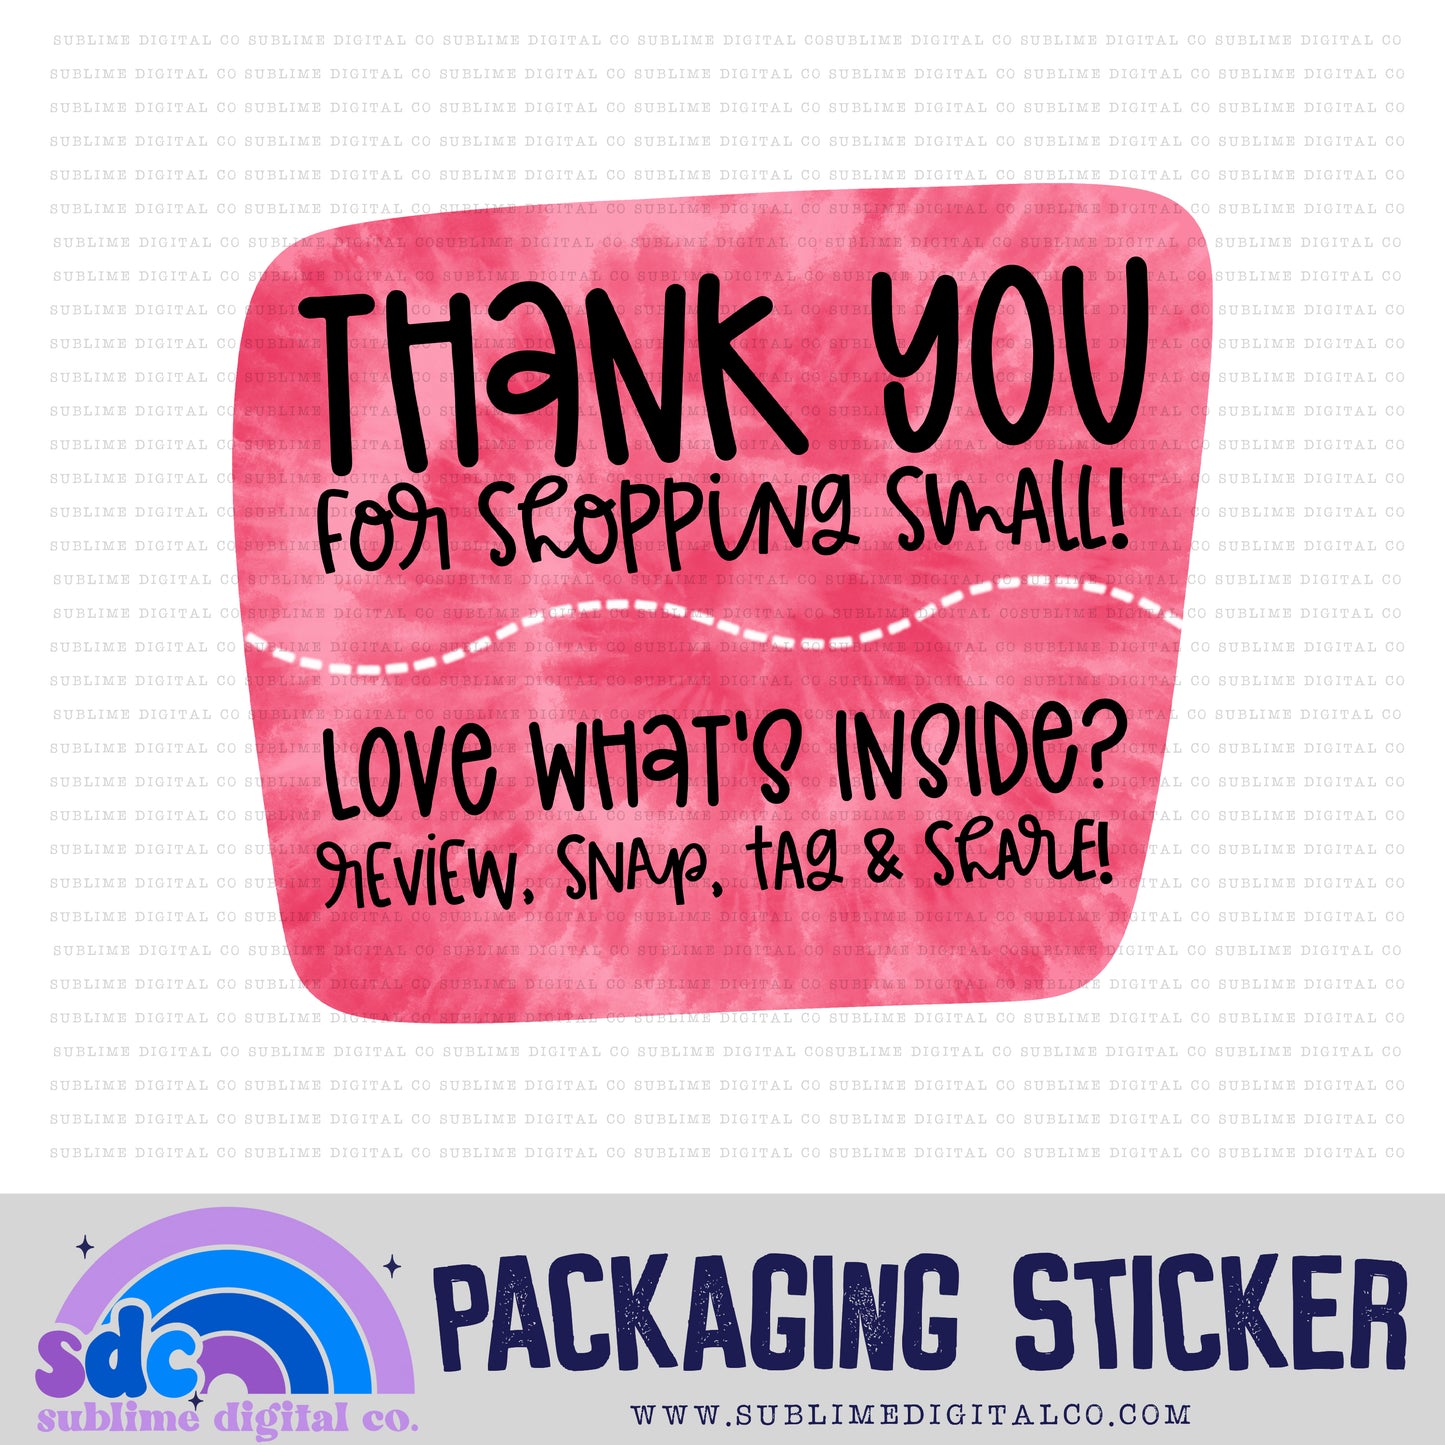 Review, Tag, Snap & Share | Small Business Stickers | Digital Download | PNG File